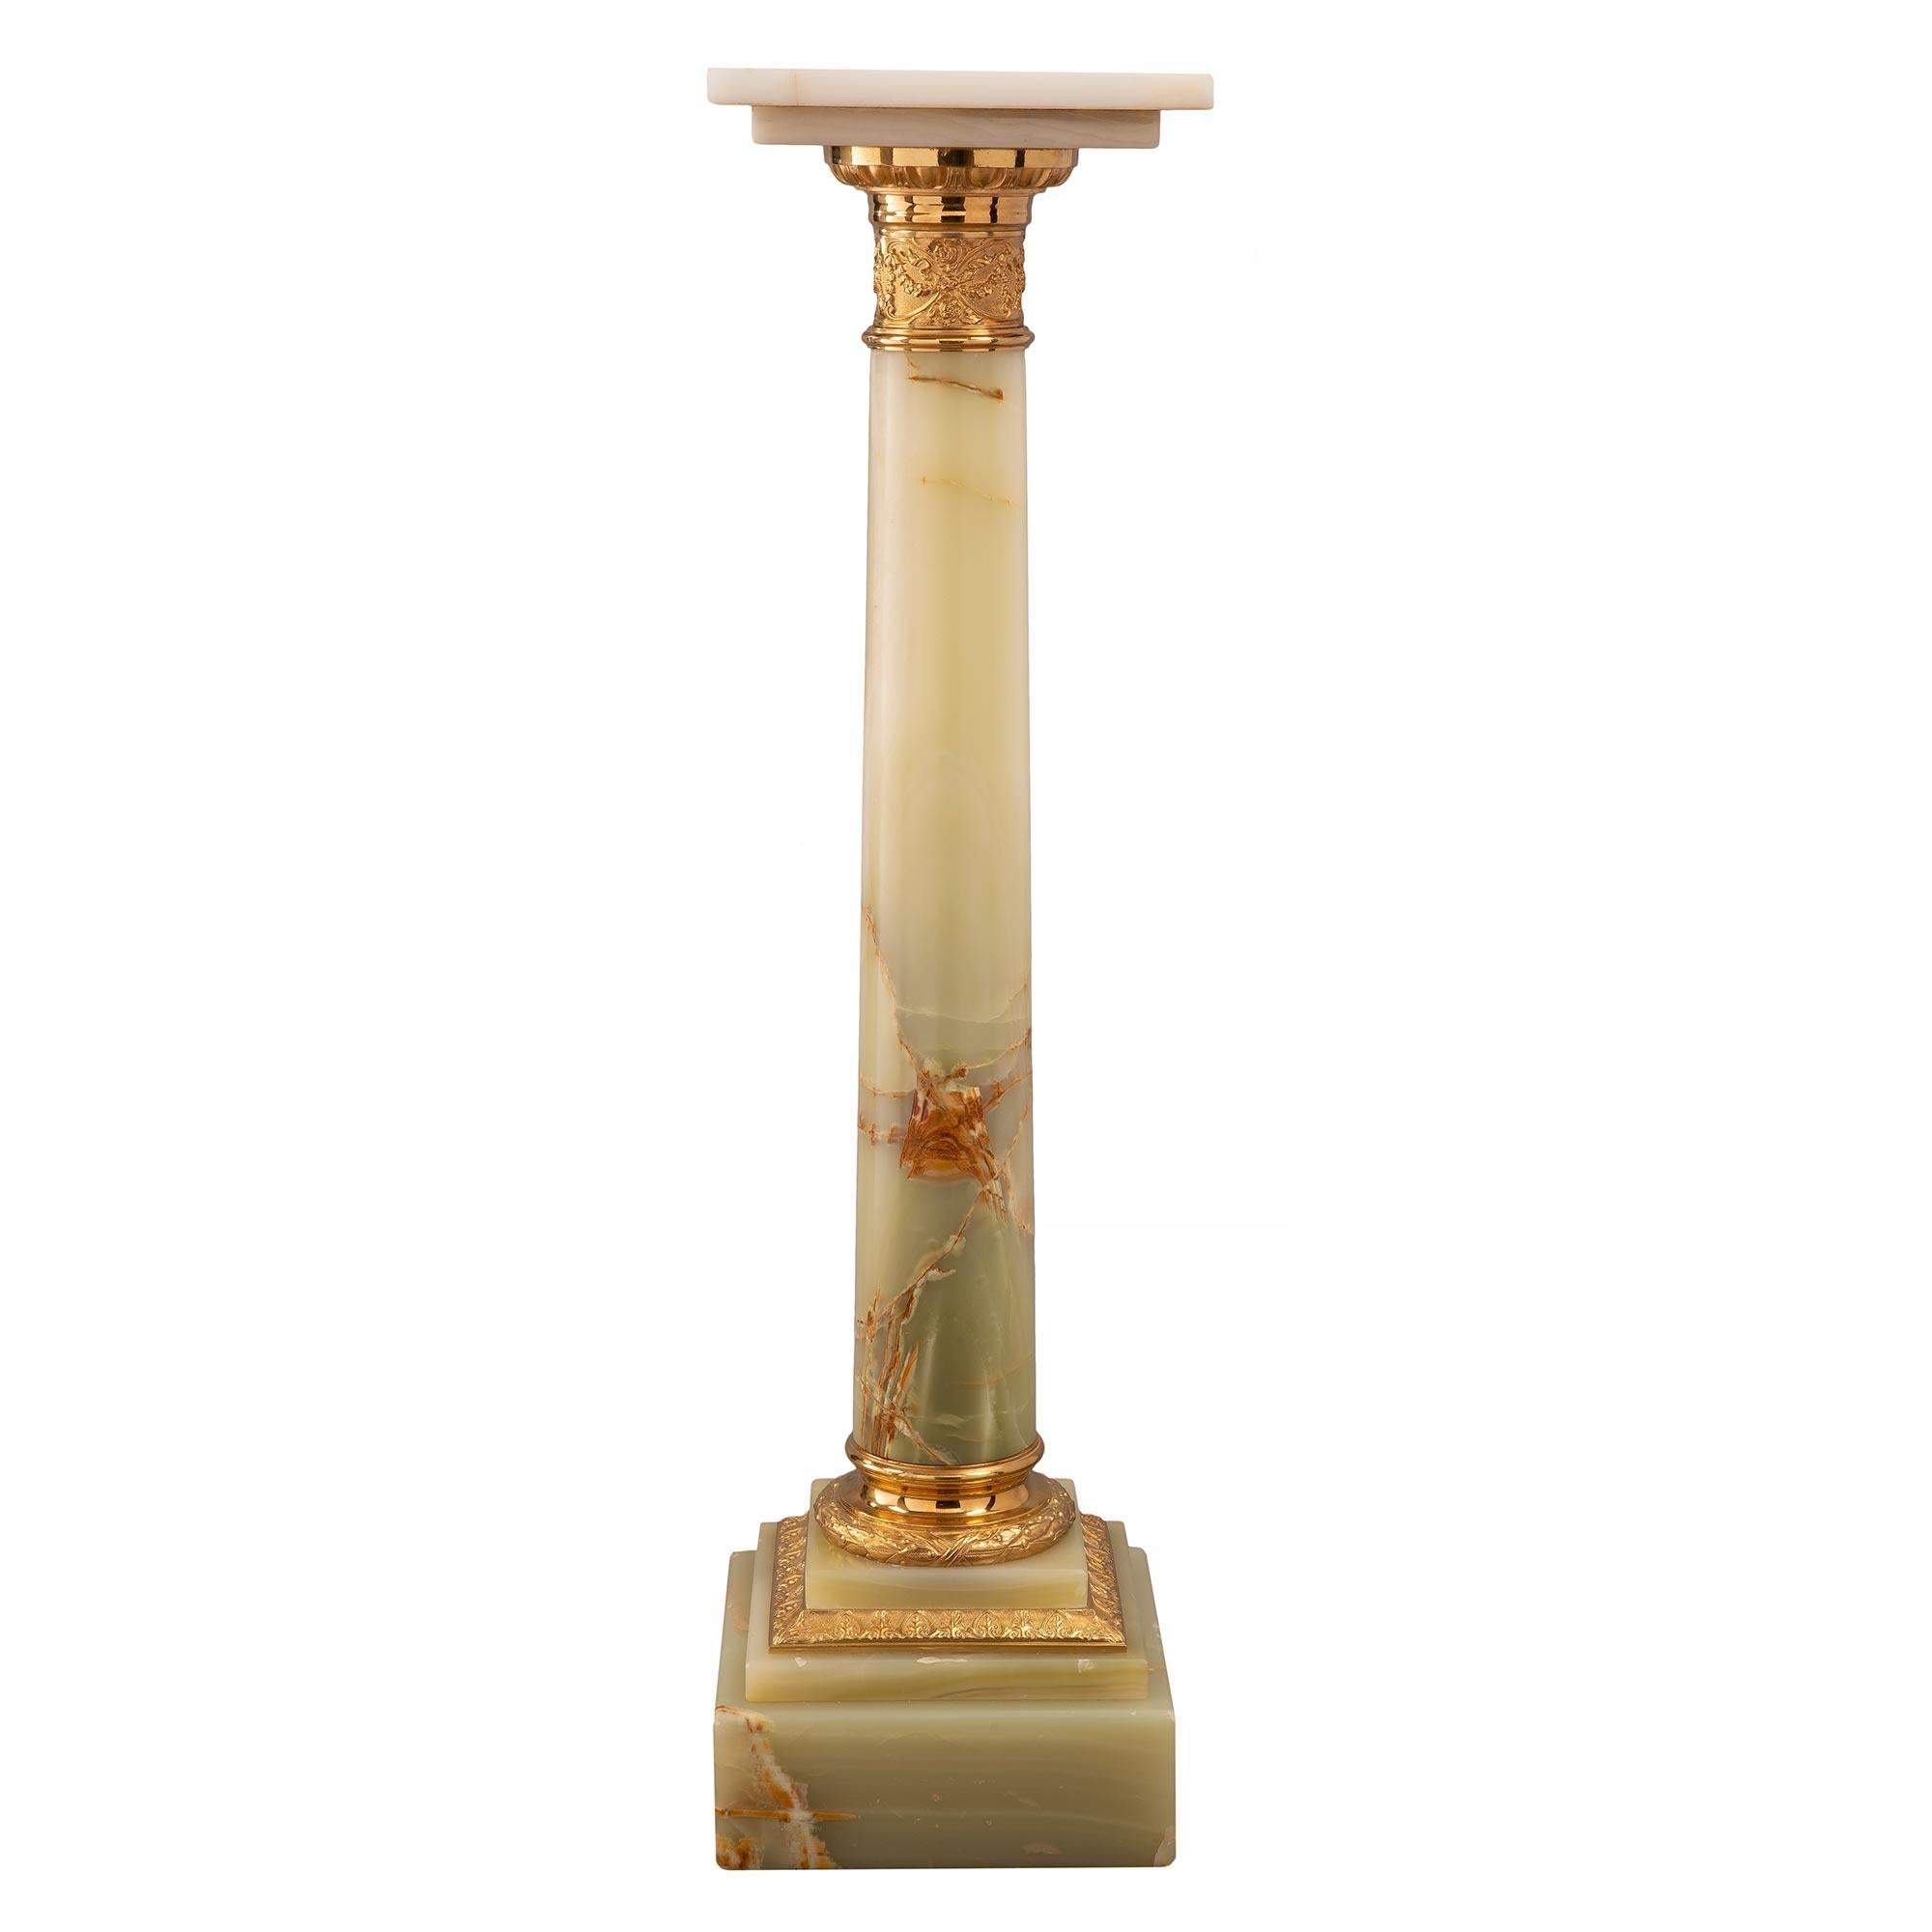 French 19th Century Louis XVI Style Onyx and Ormolu Pedestal Column In Good Condition For Sale In West Palm Beach, FL